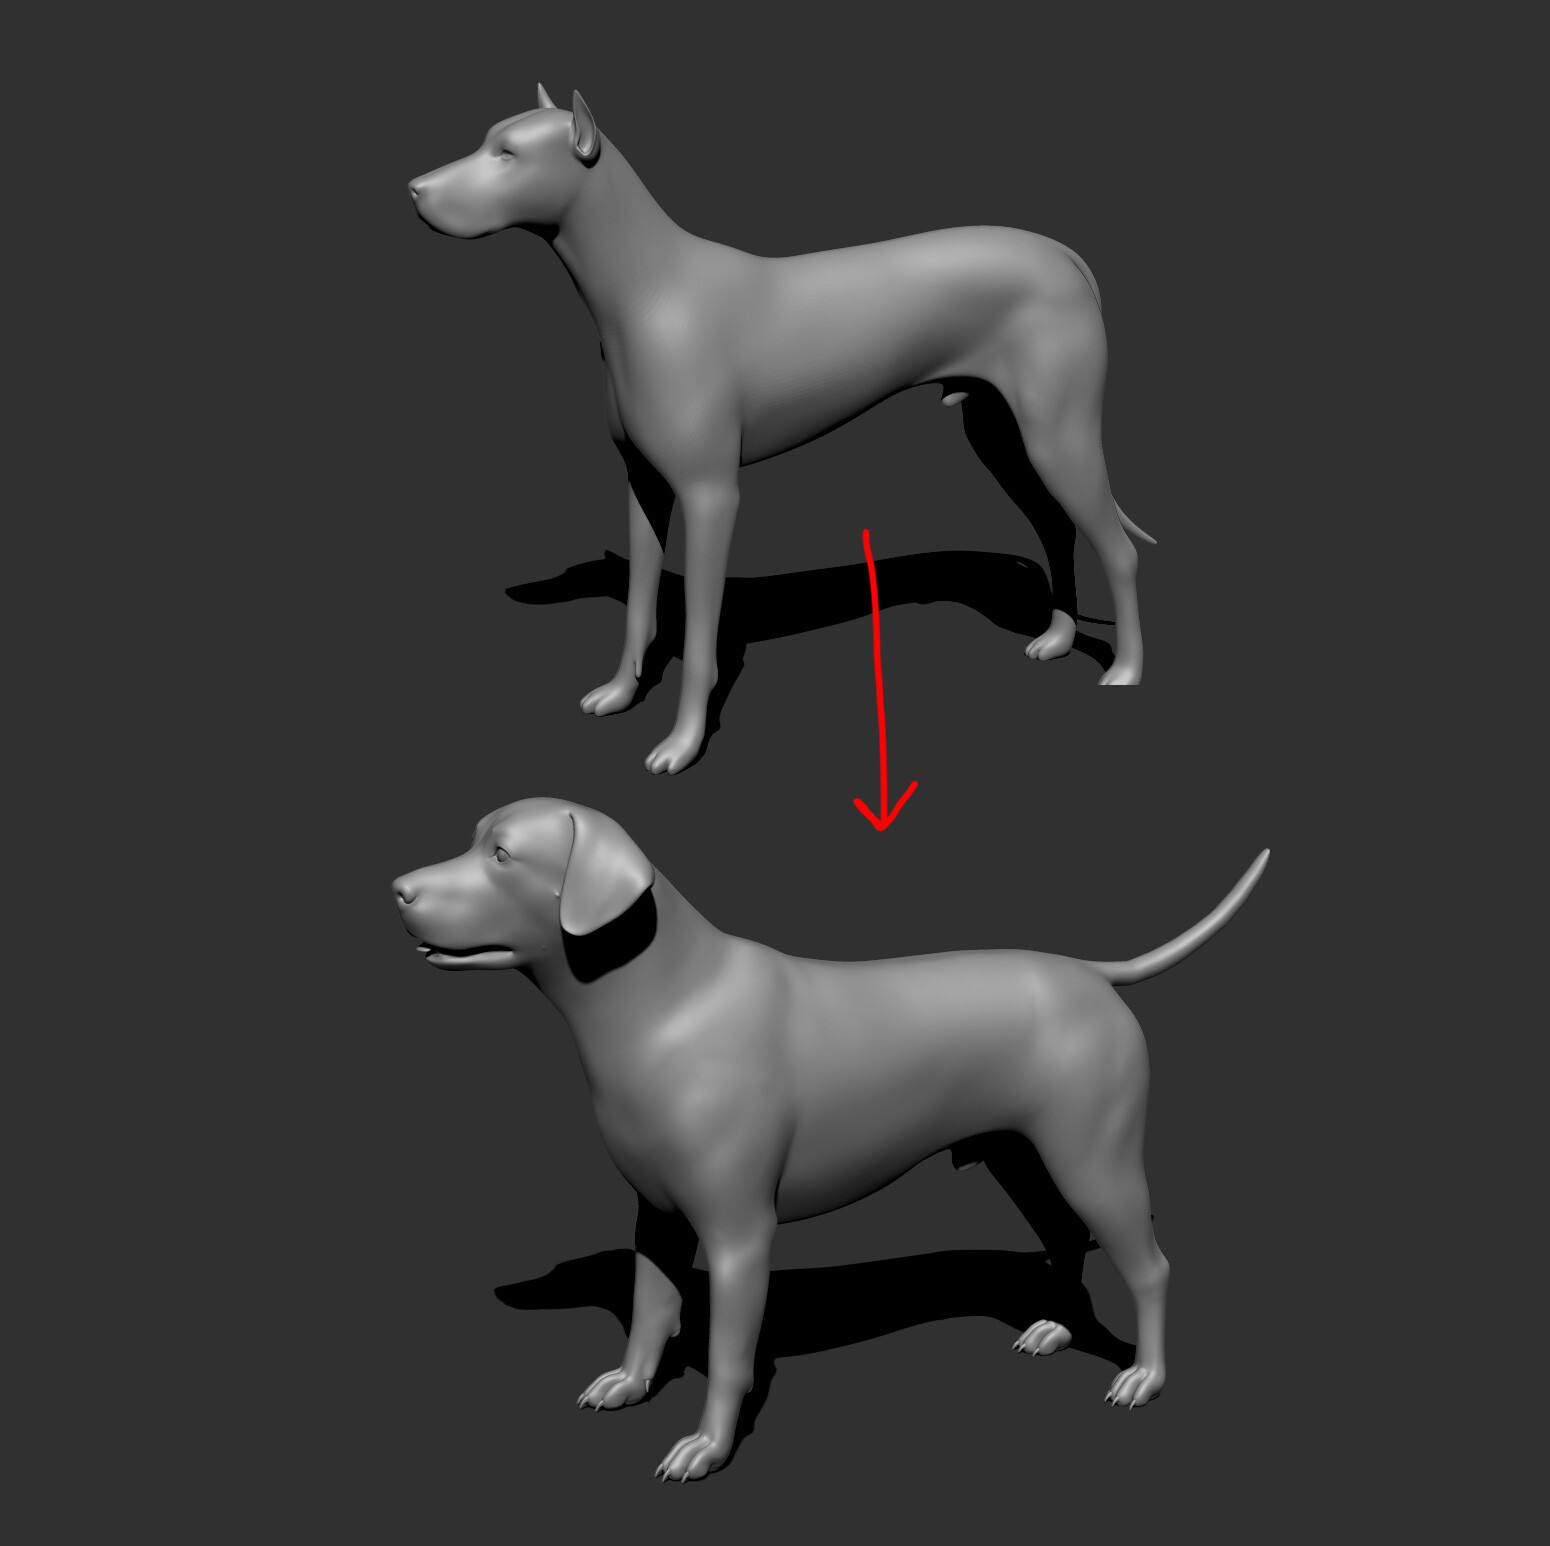 how to creat a dog in zbrush